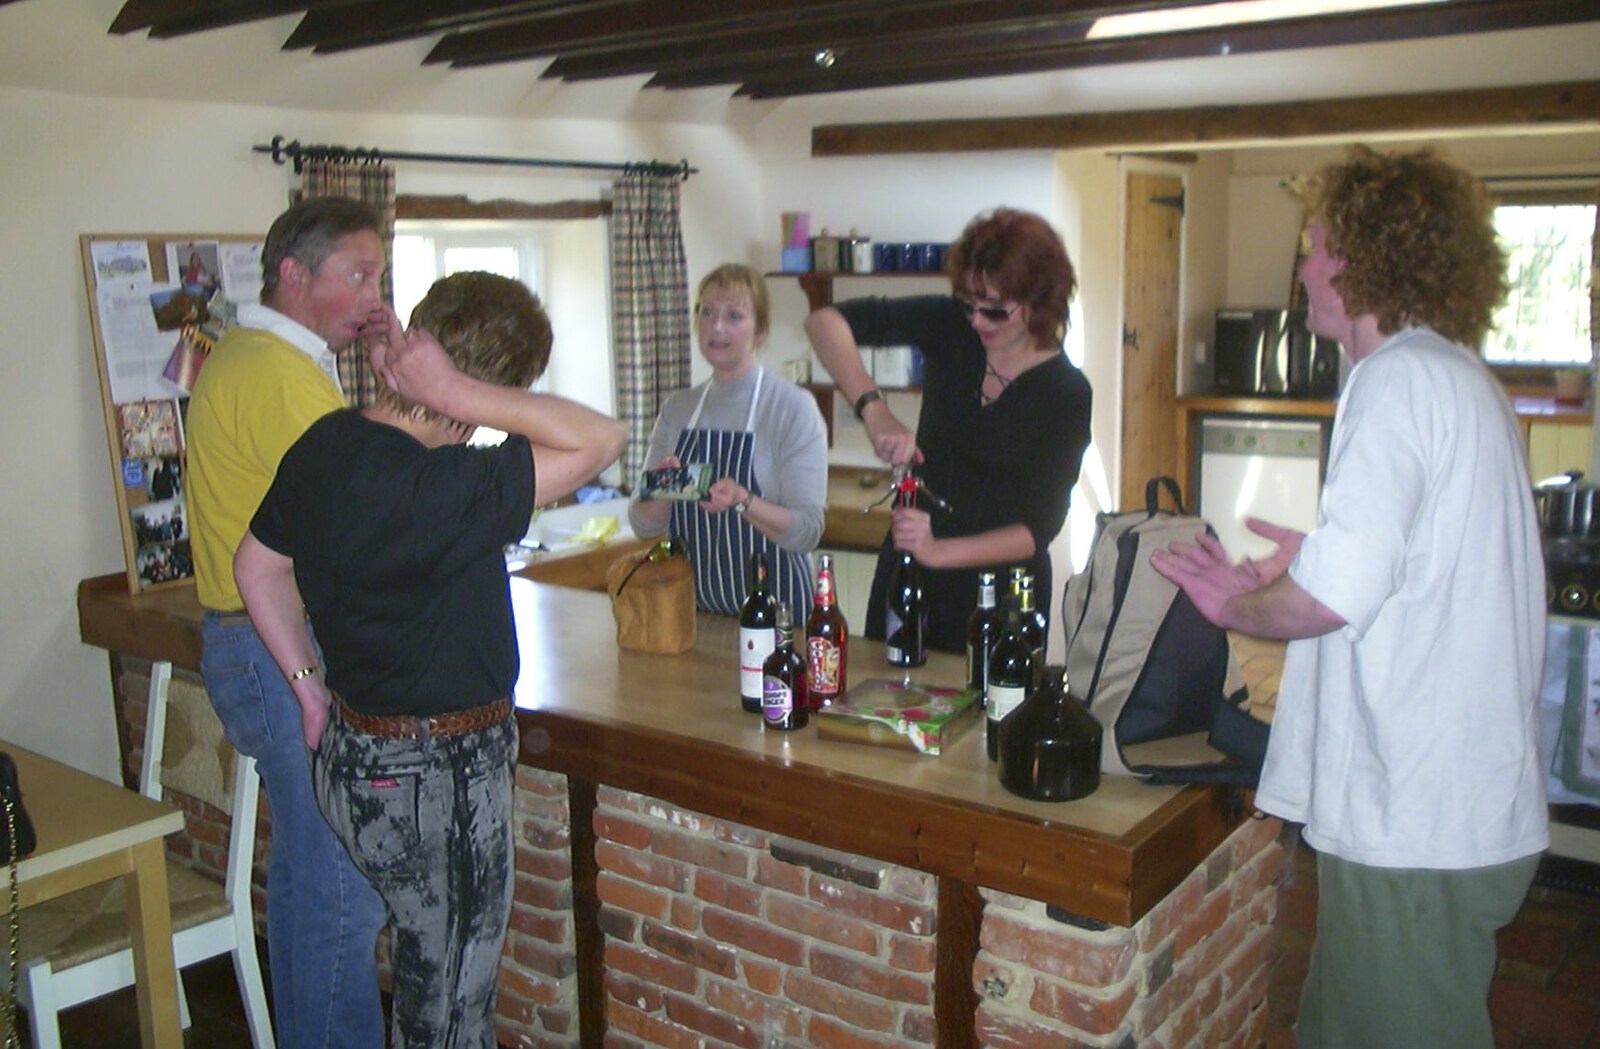 A crowd in the kitchen from Carolyn on Sunday, Wymondham, Norfolk - 23rd March 2003